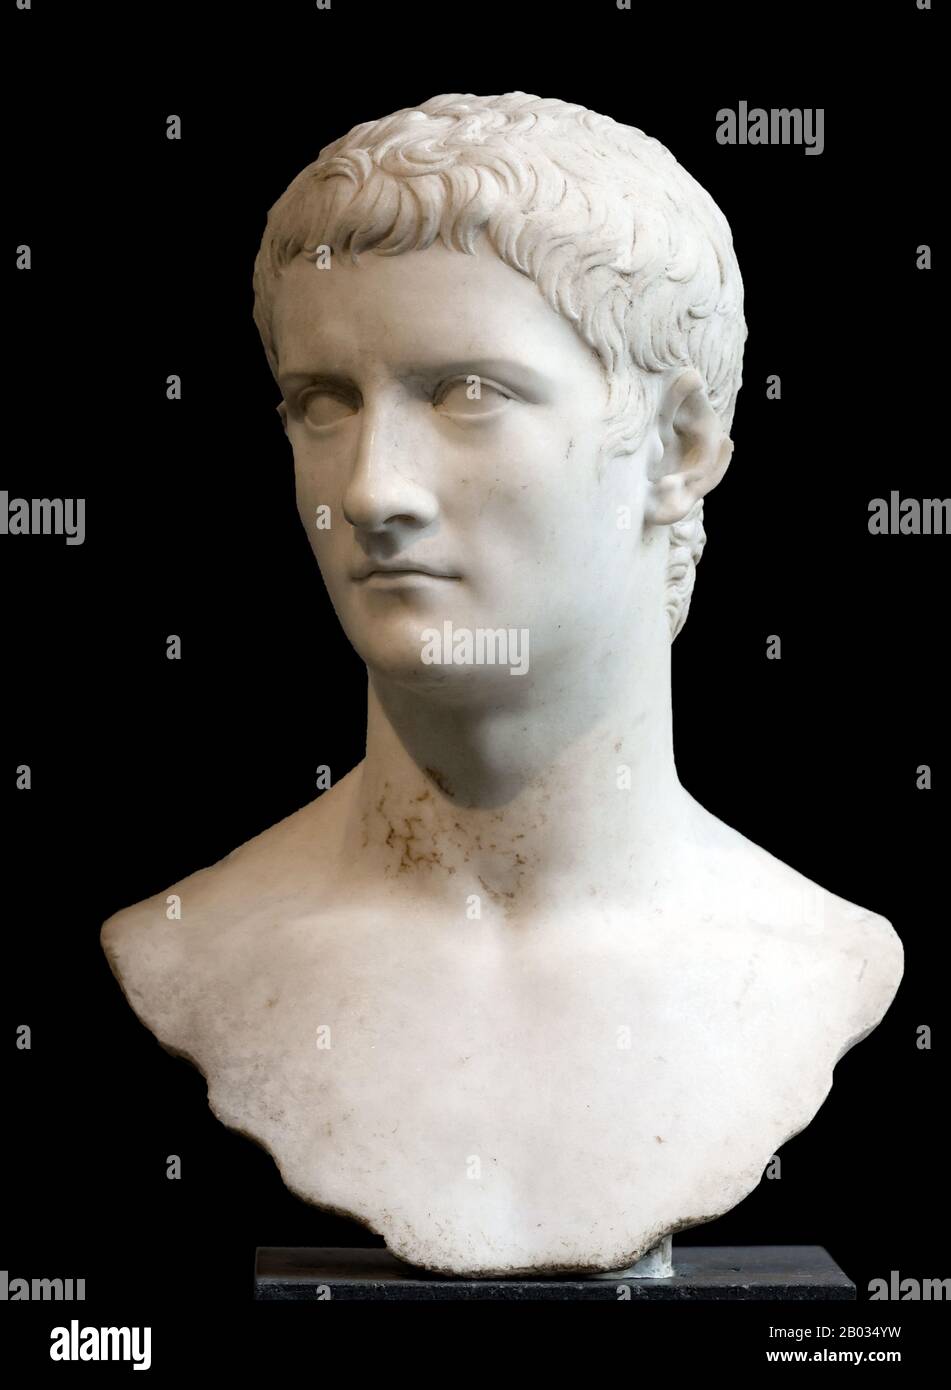 Born Gaius Julius Caesar Germanicus, Caligula was the nephew and adopted son of Emperor Tiberius, making him part of the Julio-Claudian dynasty. He earned the nickname 'Caligula' (little solder's boot) while accompanying his father, Germanicus, during his campaigns in Germania.  His mother, Agrippina the Elder, became entangled in a deadly feud with Emperor Tiberius that resulted in the destruction of her family and leaving Caligula the sole male survivor. After Tiberius' death in 37 CE, Caligula succeeded his grand uncle as emperor. Surviving sources of his reign are few and far between, but Stock Photo